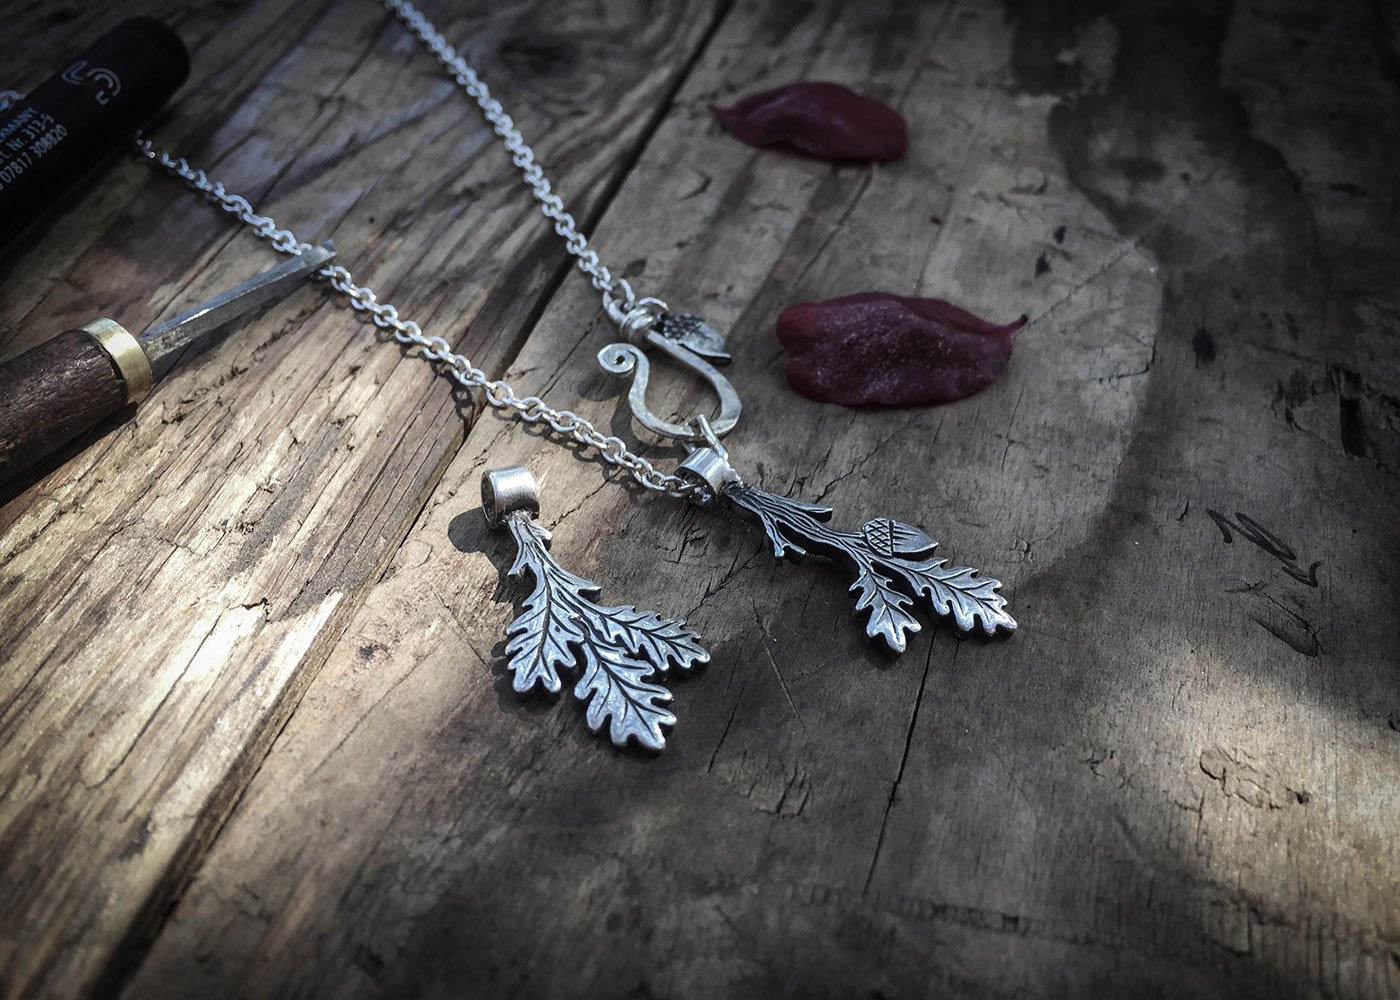 oak leaf necklace handmade from reused silver and bronze coins